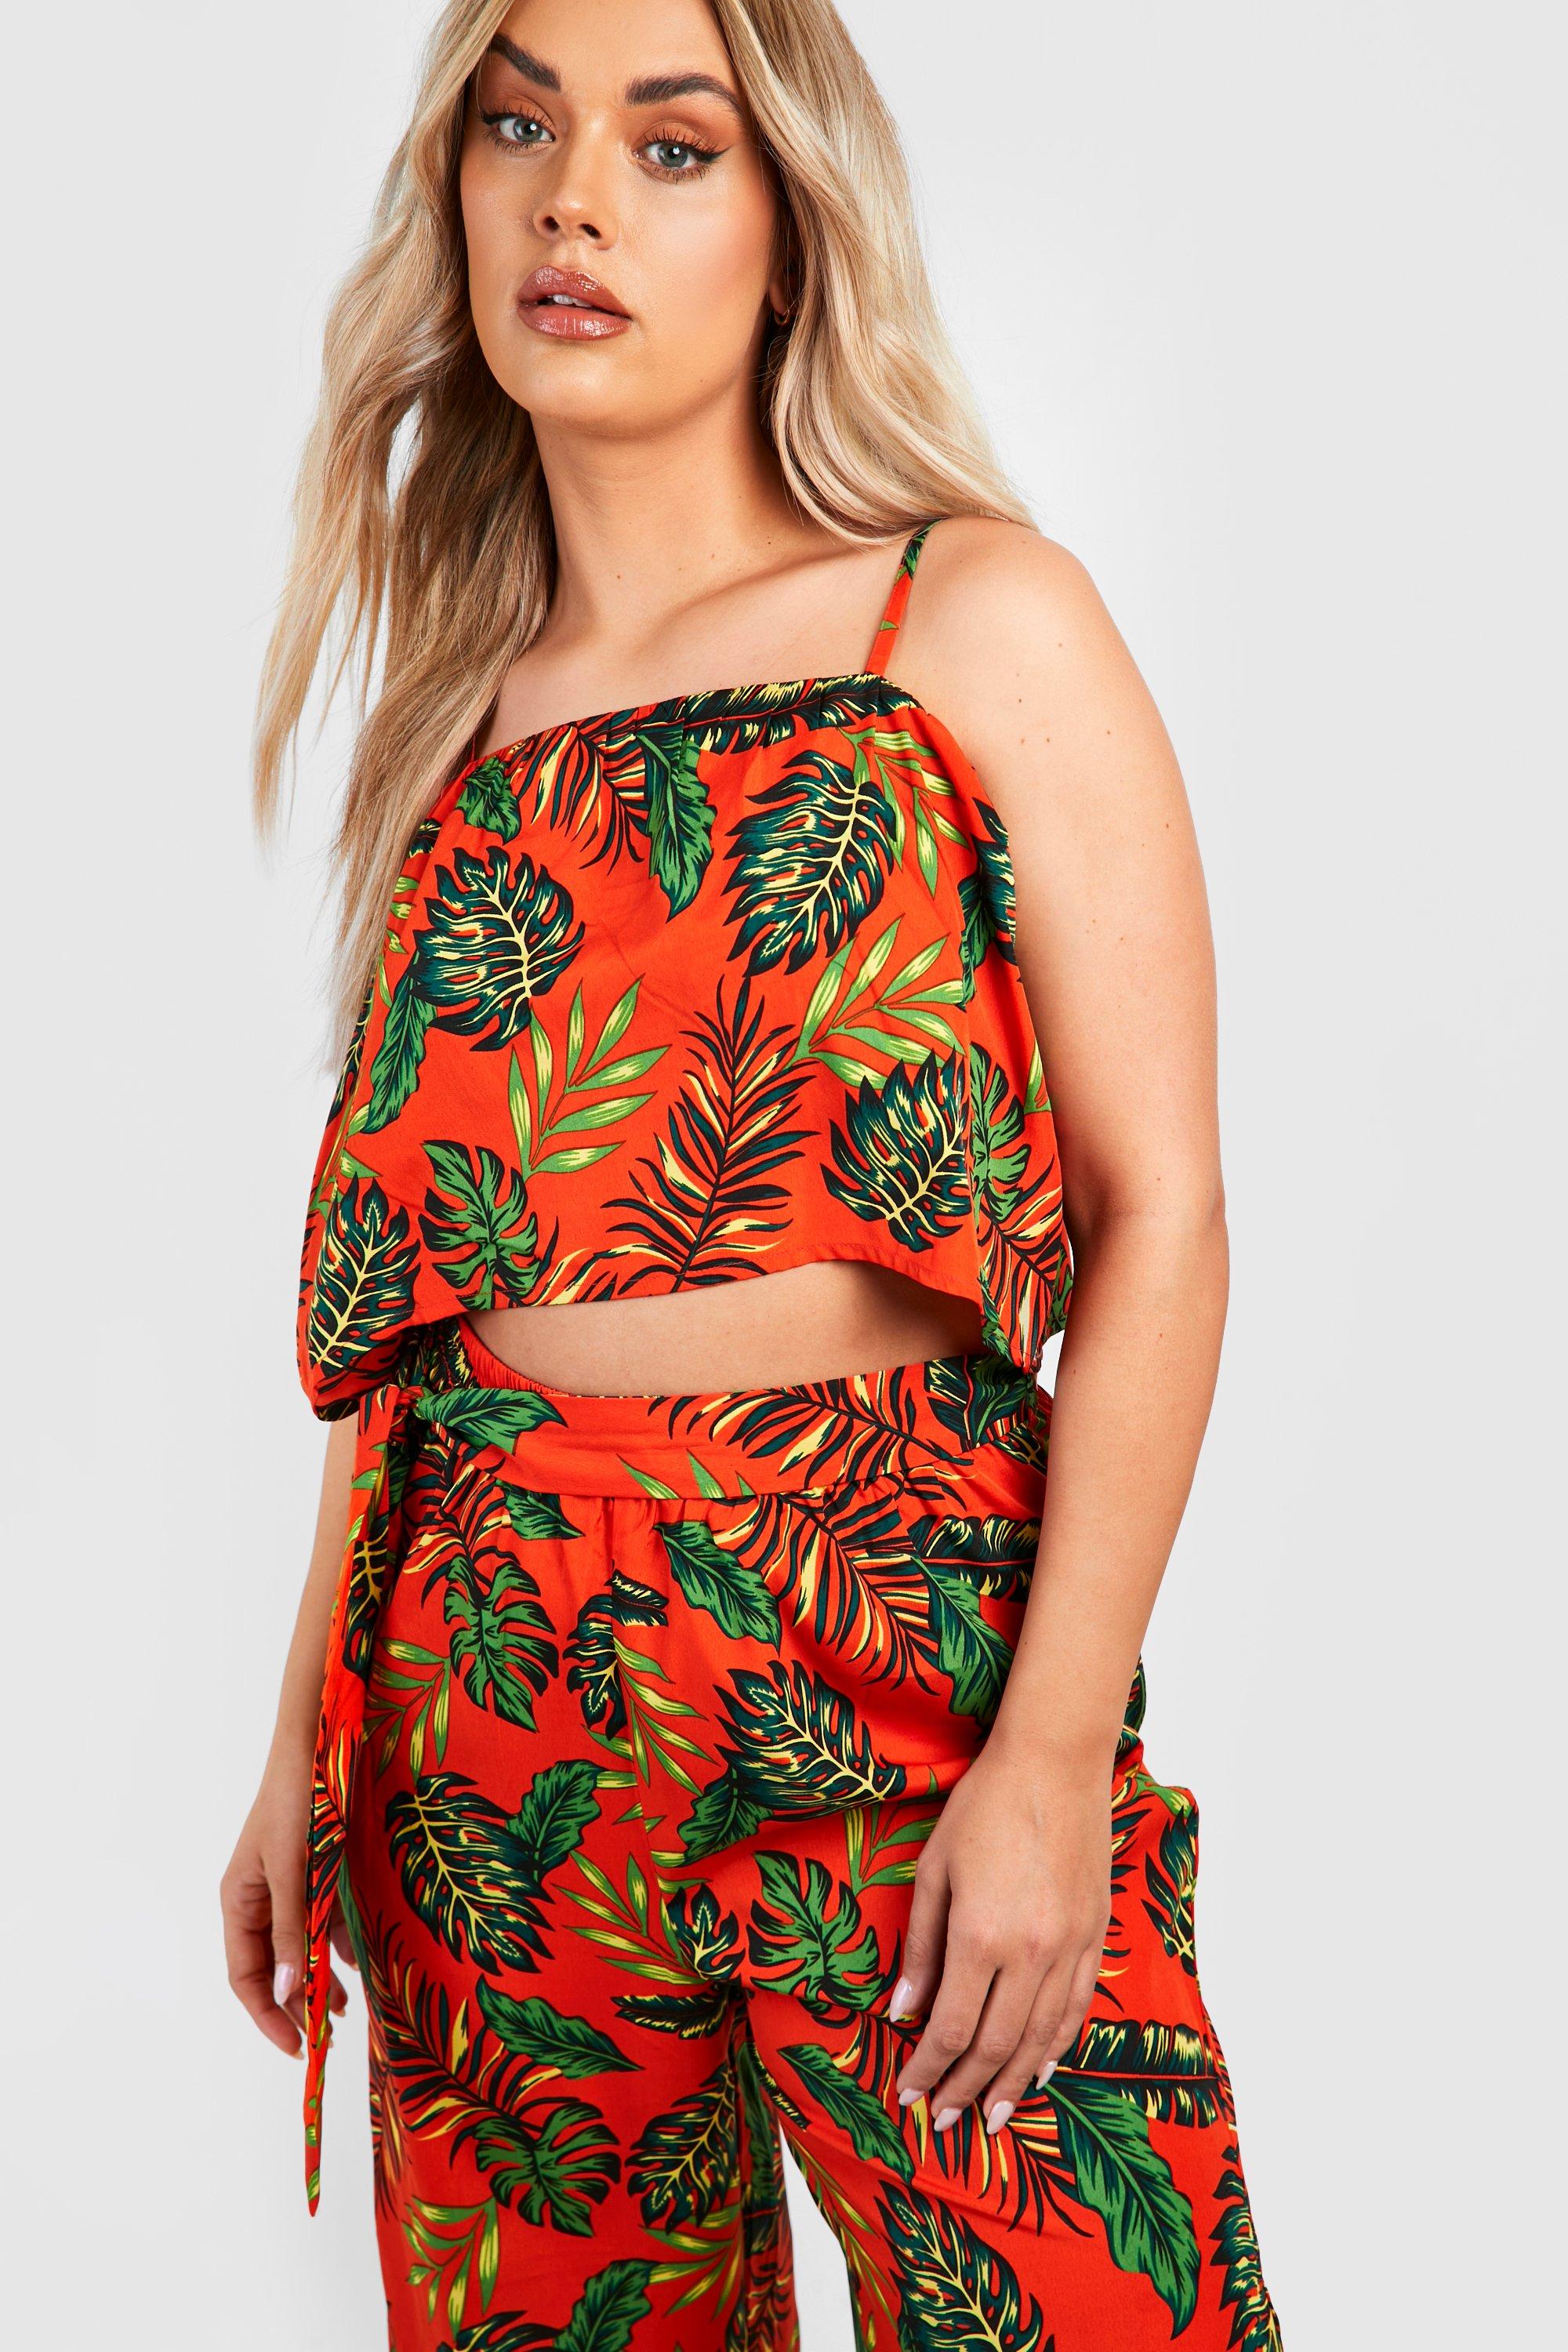 Plus Palm Print Tie Waist Pants And Top Two-Piece